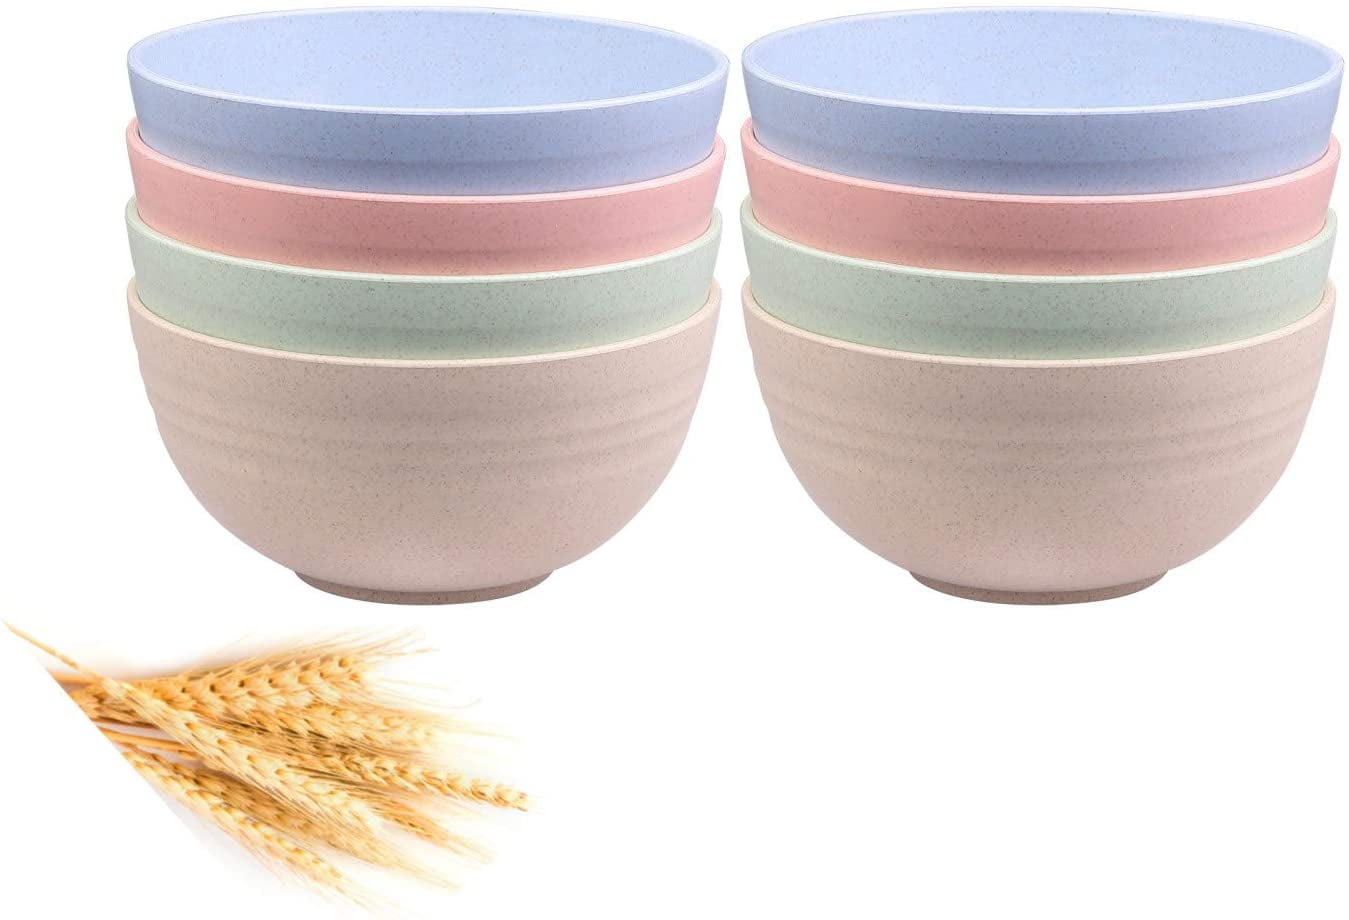 Dishwasher & Microwave Safe 24 OZ Unbreakable Lightweight Bowl Sets Eco-friendly Bowls for Kids,Children,Rice,Soup NAWOVAO Wheat Straw Cereal Bowls